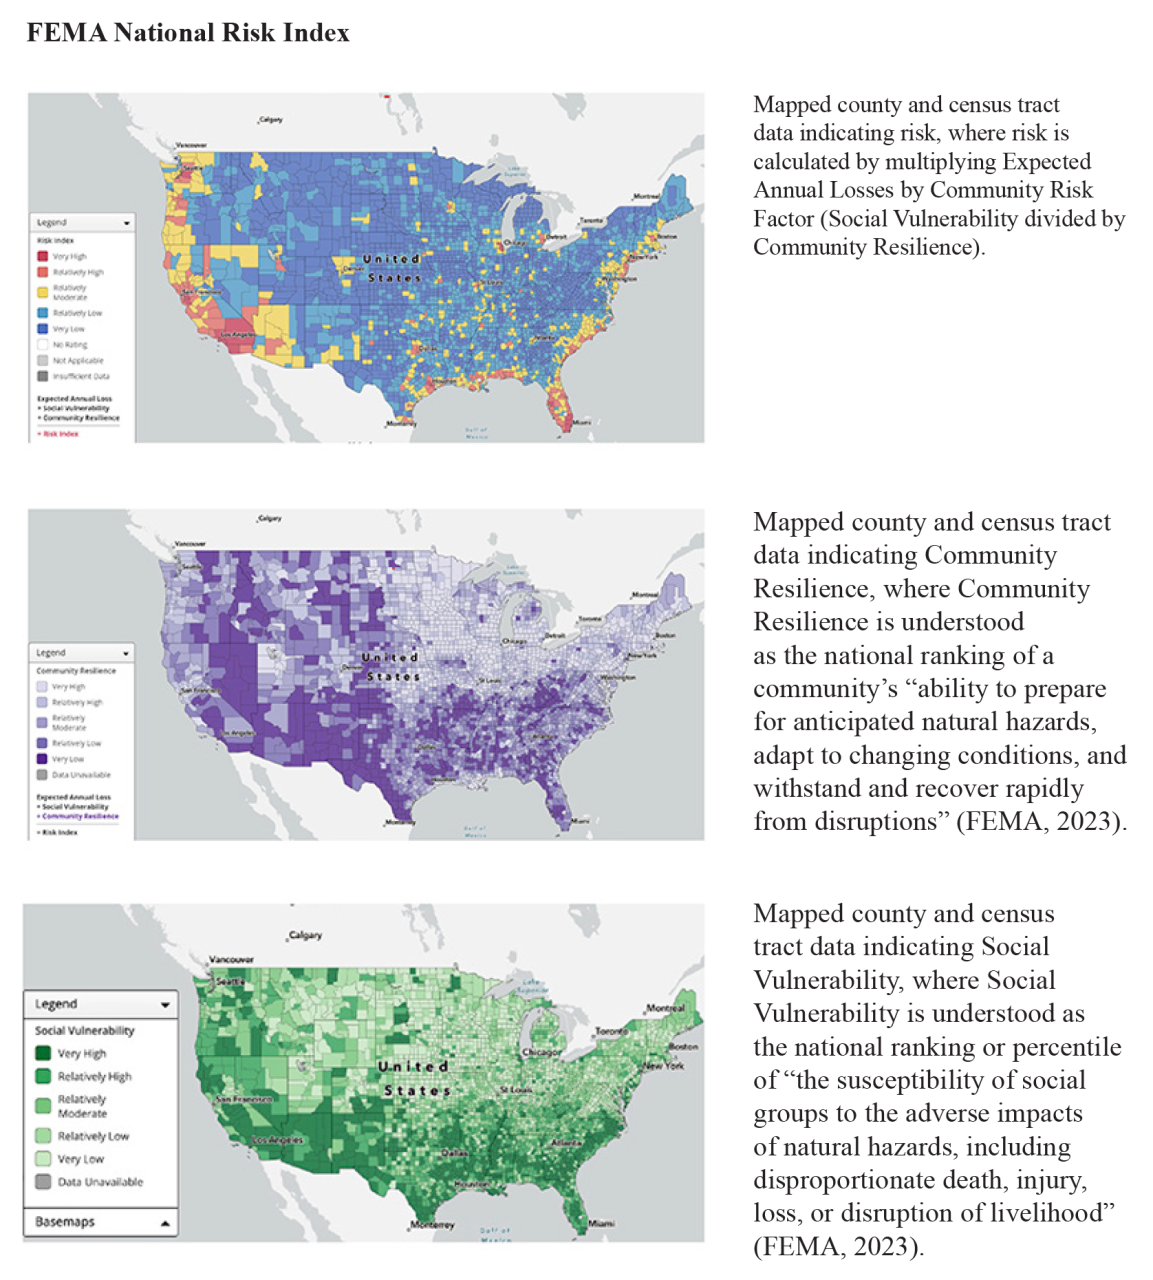 Three maps of FEMA risk index covering social vulnerability, community resilience, and potential losses.